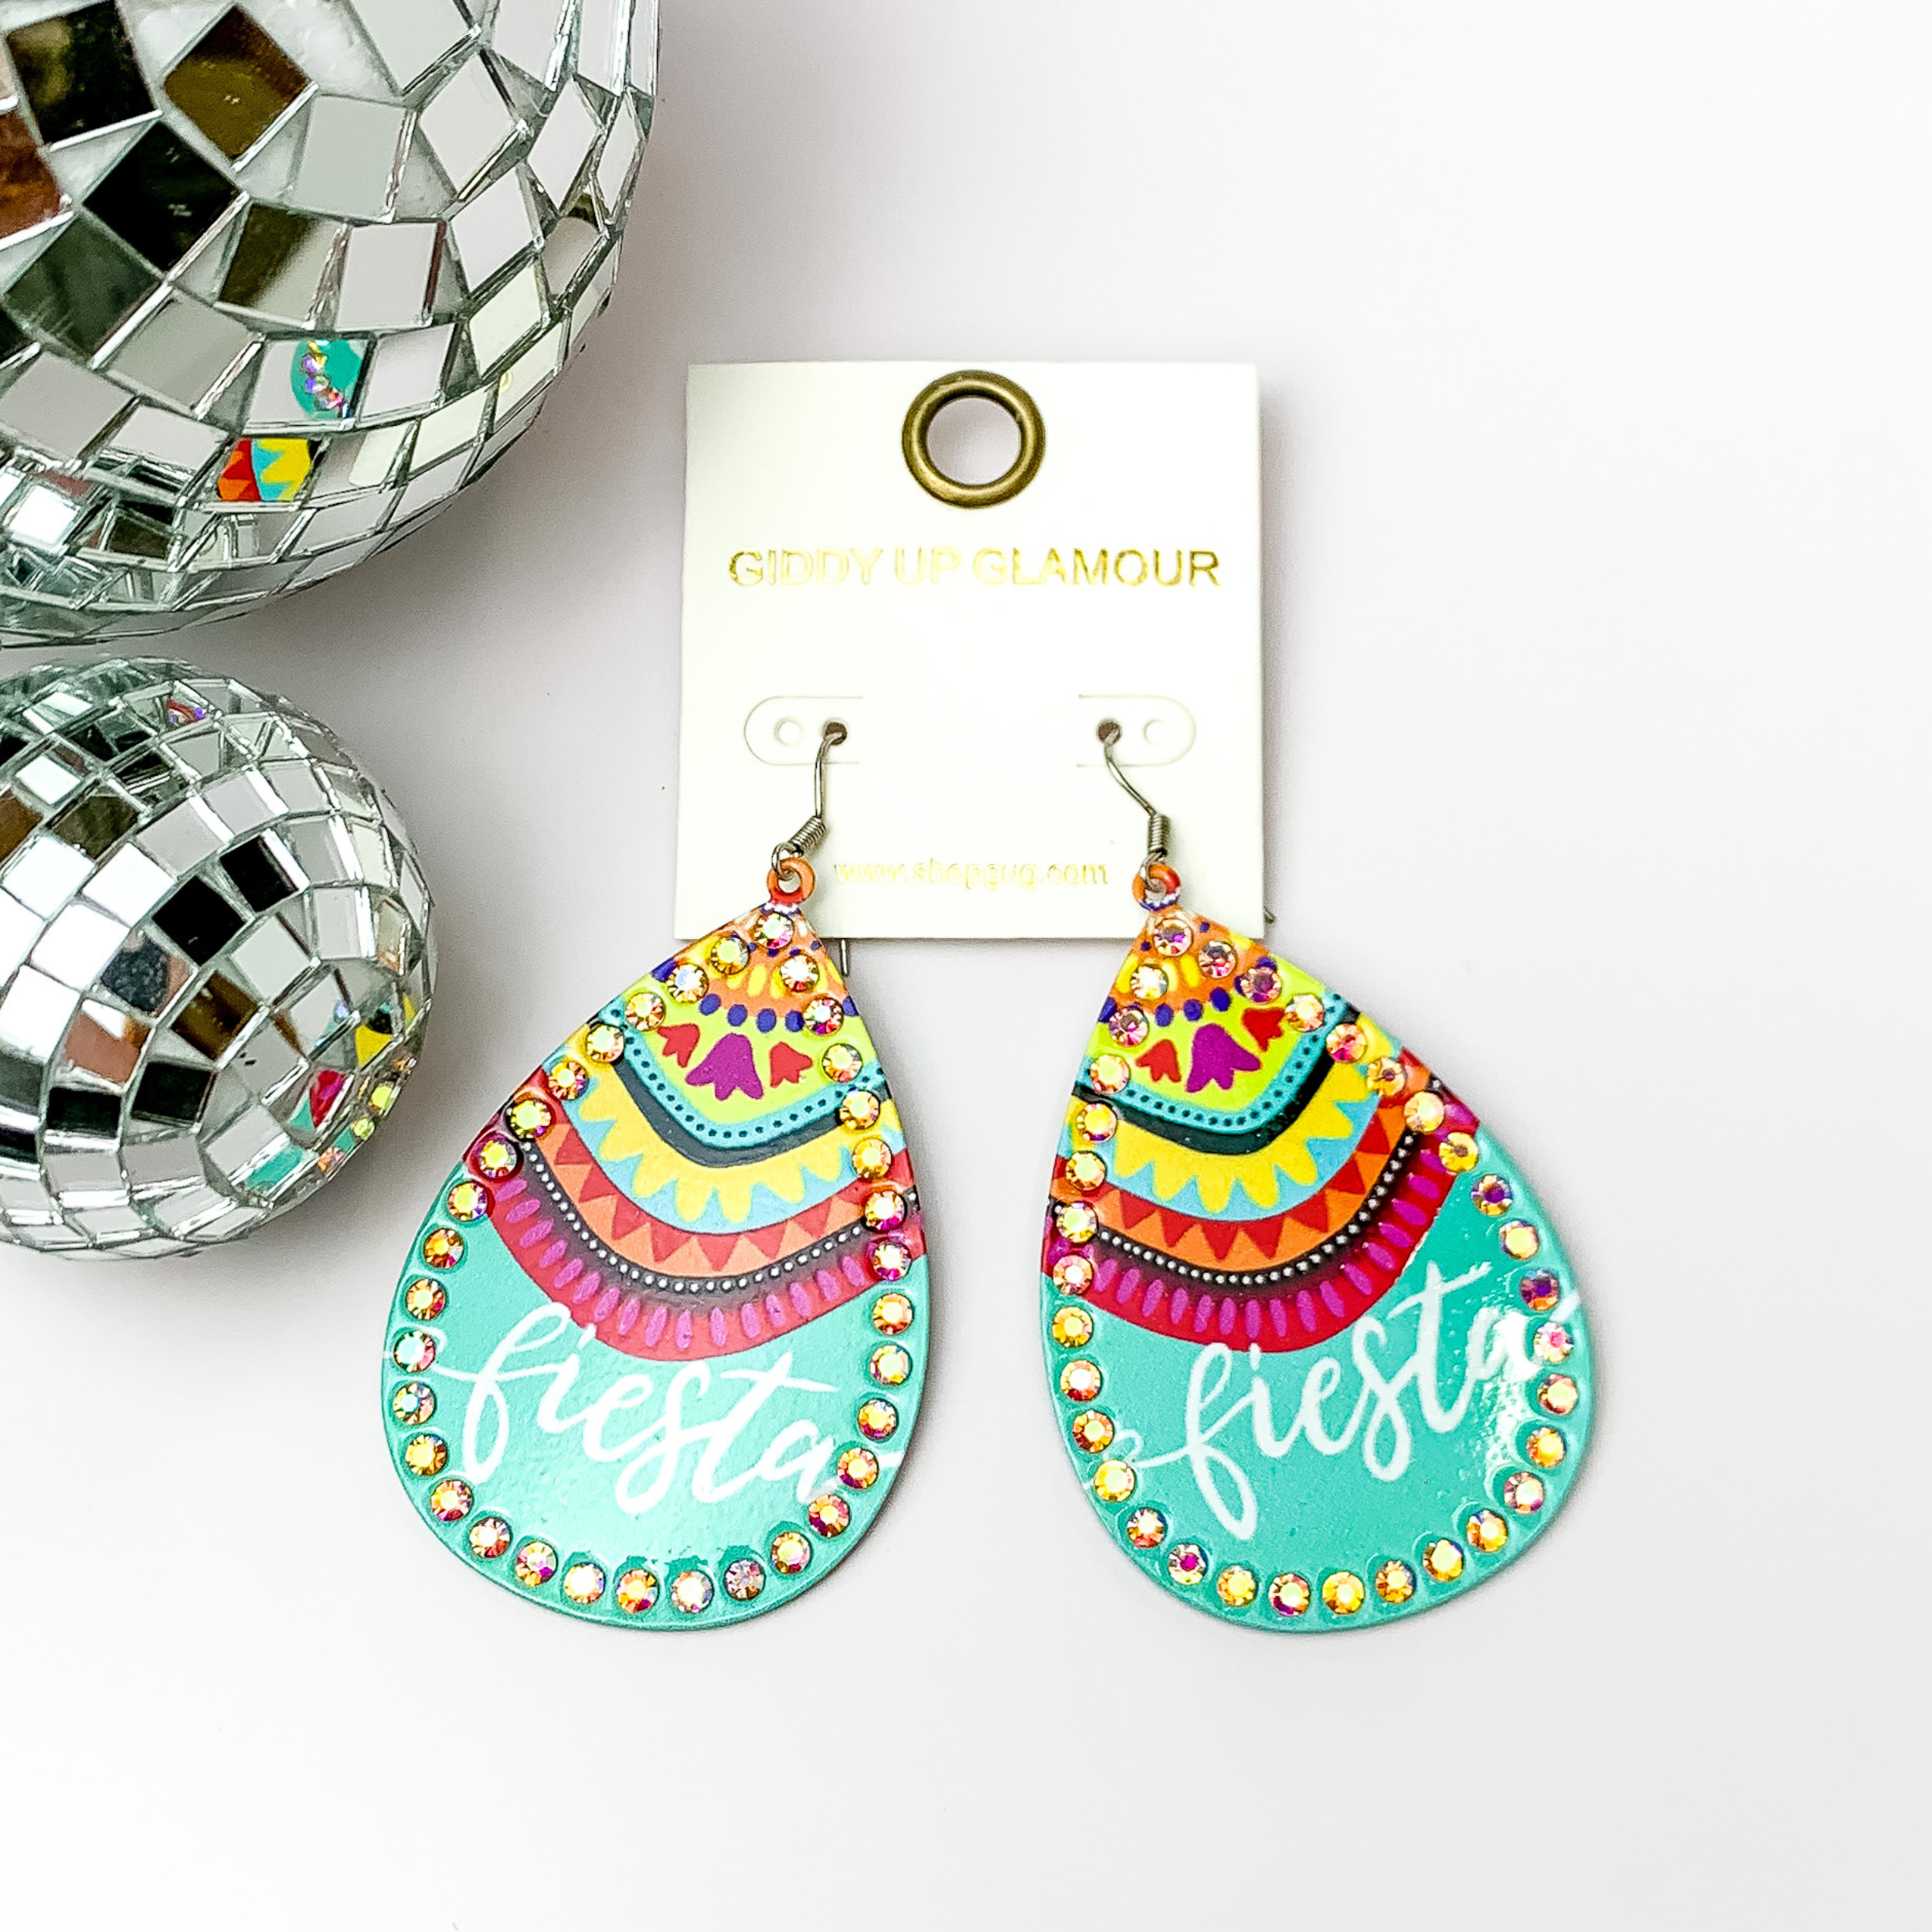  Pictured are teardrop metal turquoise earrings with ab crydtals around it. They are pictured with disco balls in the left corner on a white background.